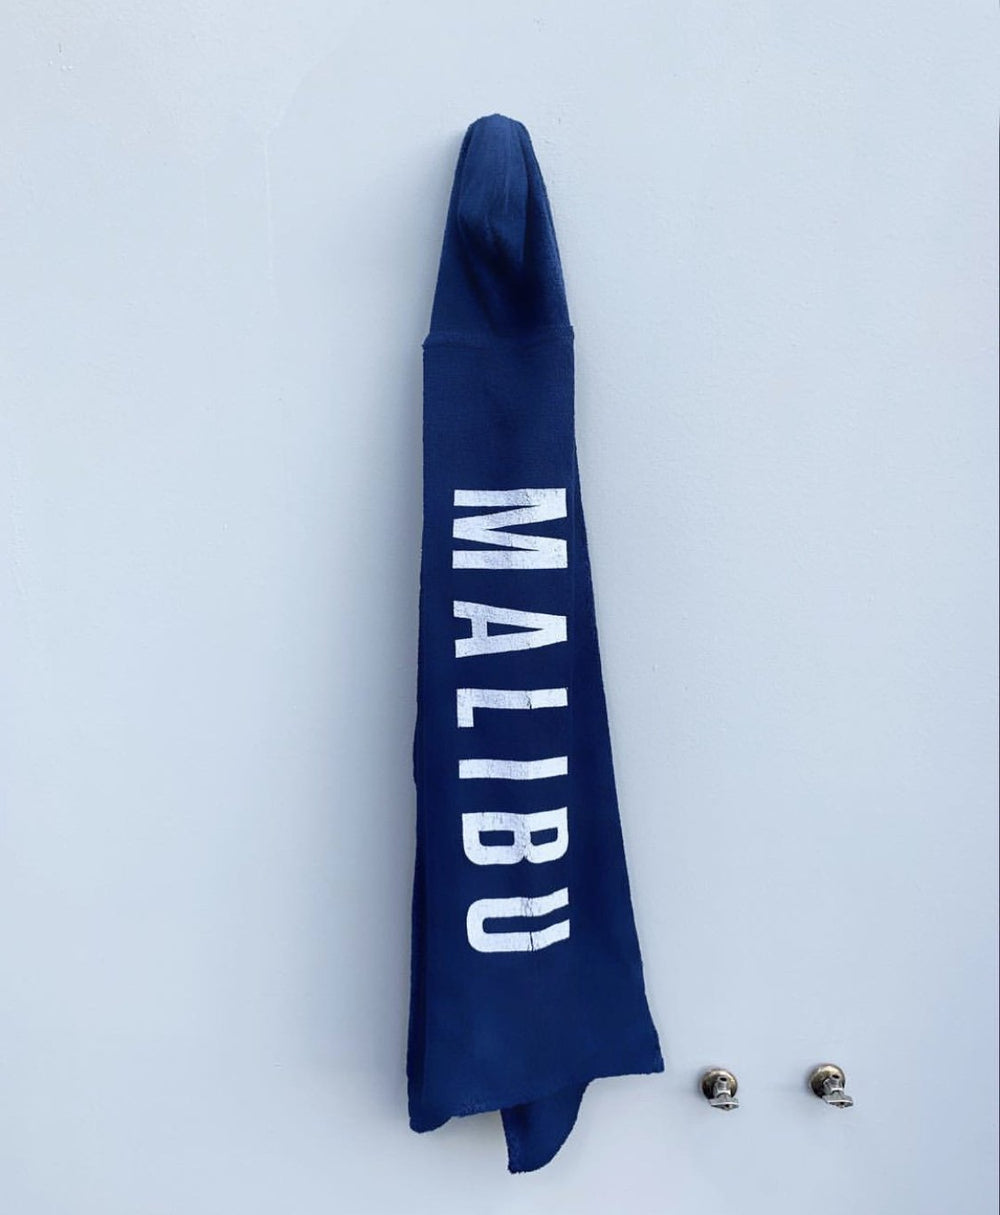 One Gun Adult Hooded Beach Towels. The towel is blue with Malibu written in white text